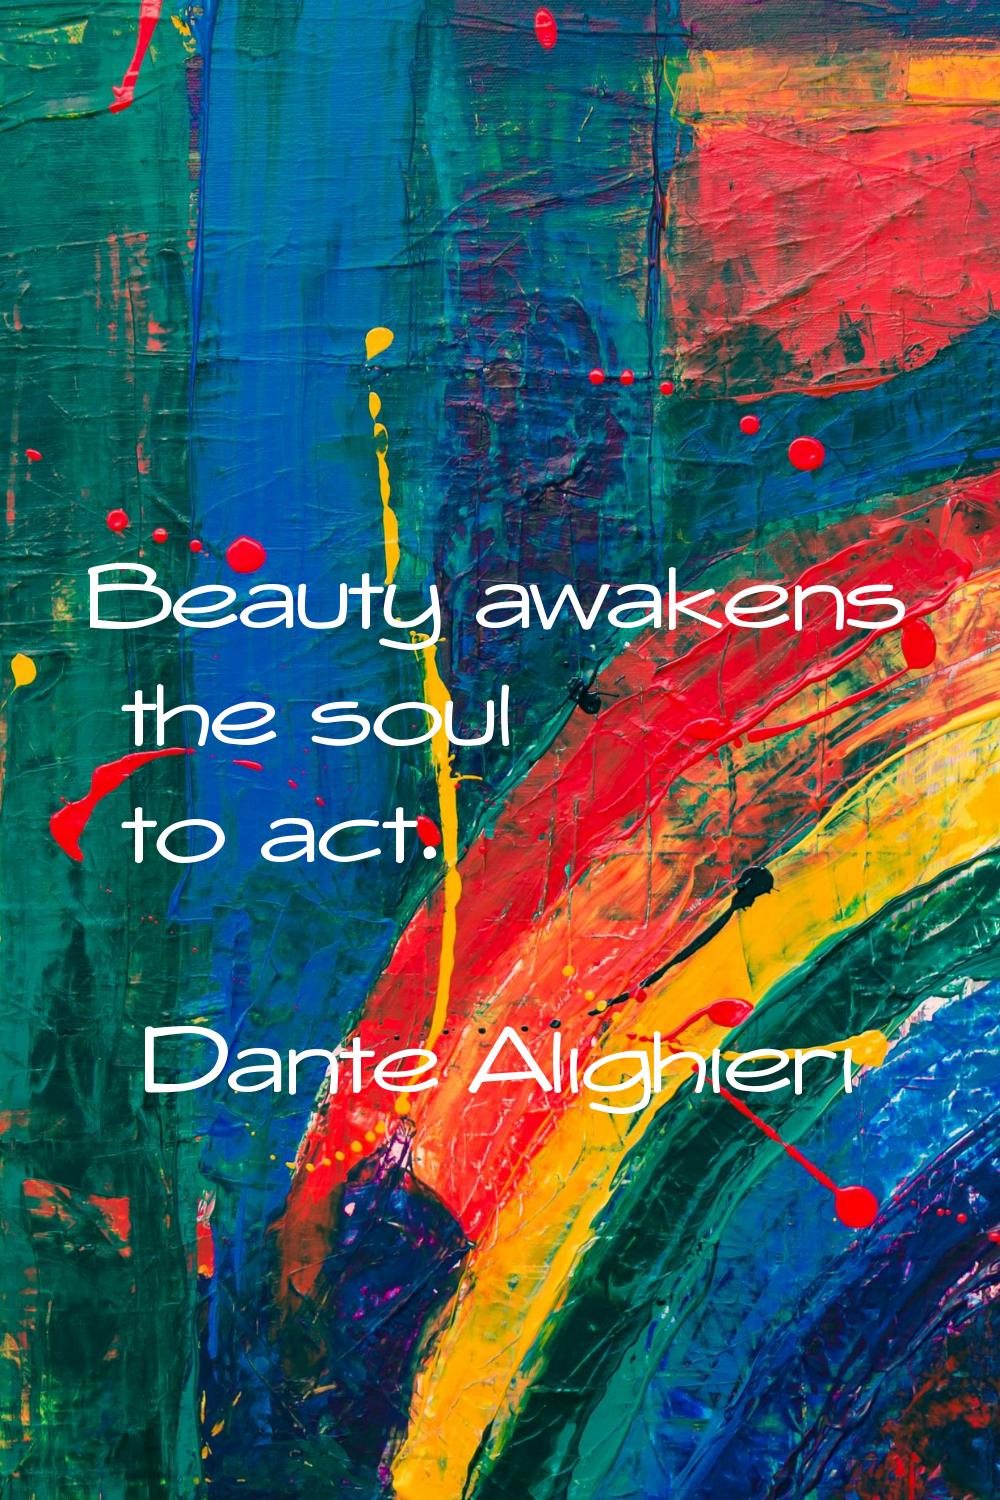 Beauty awakens the soul to act.